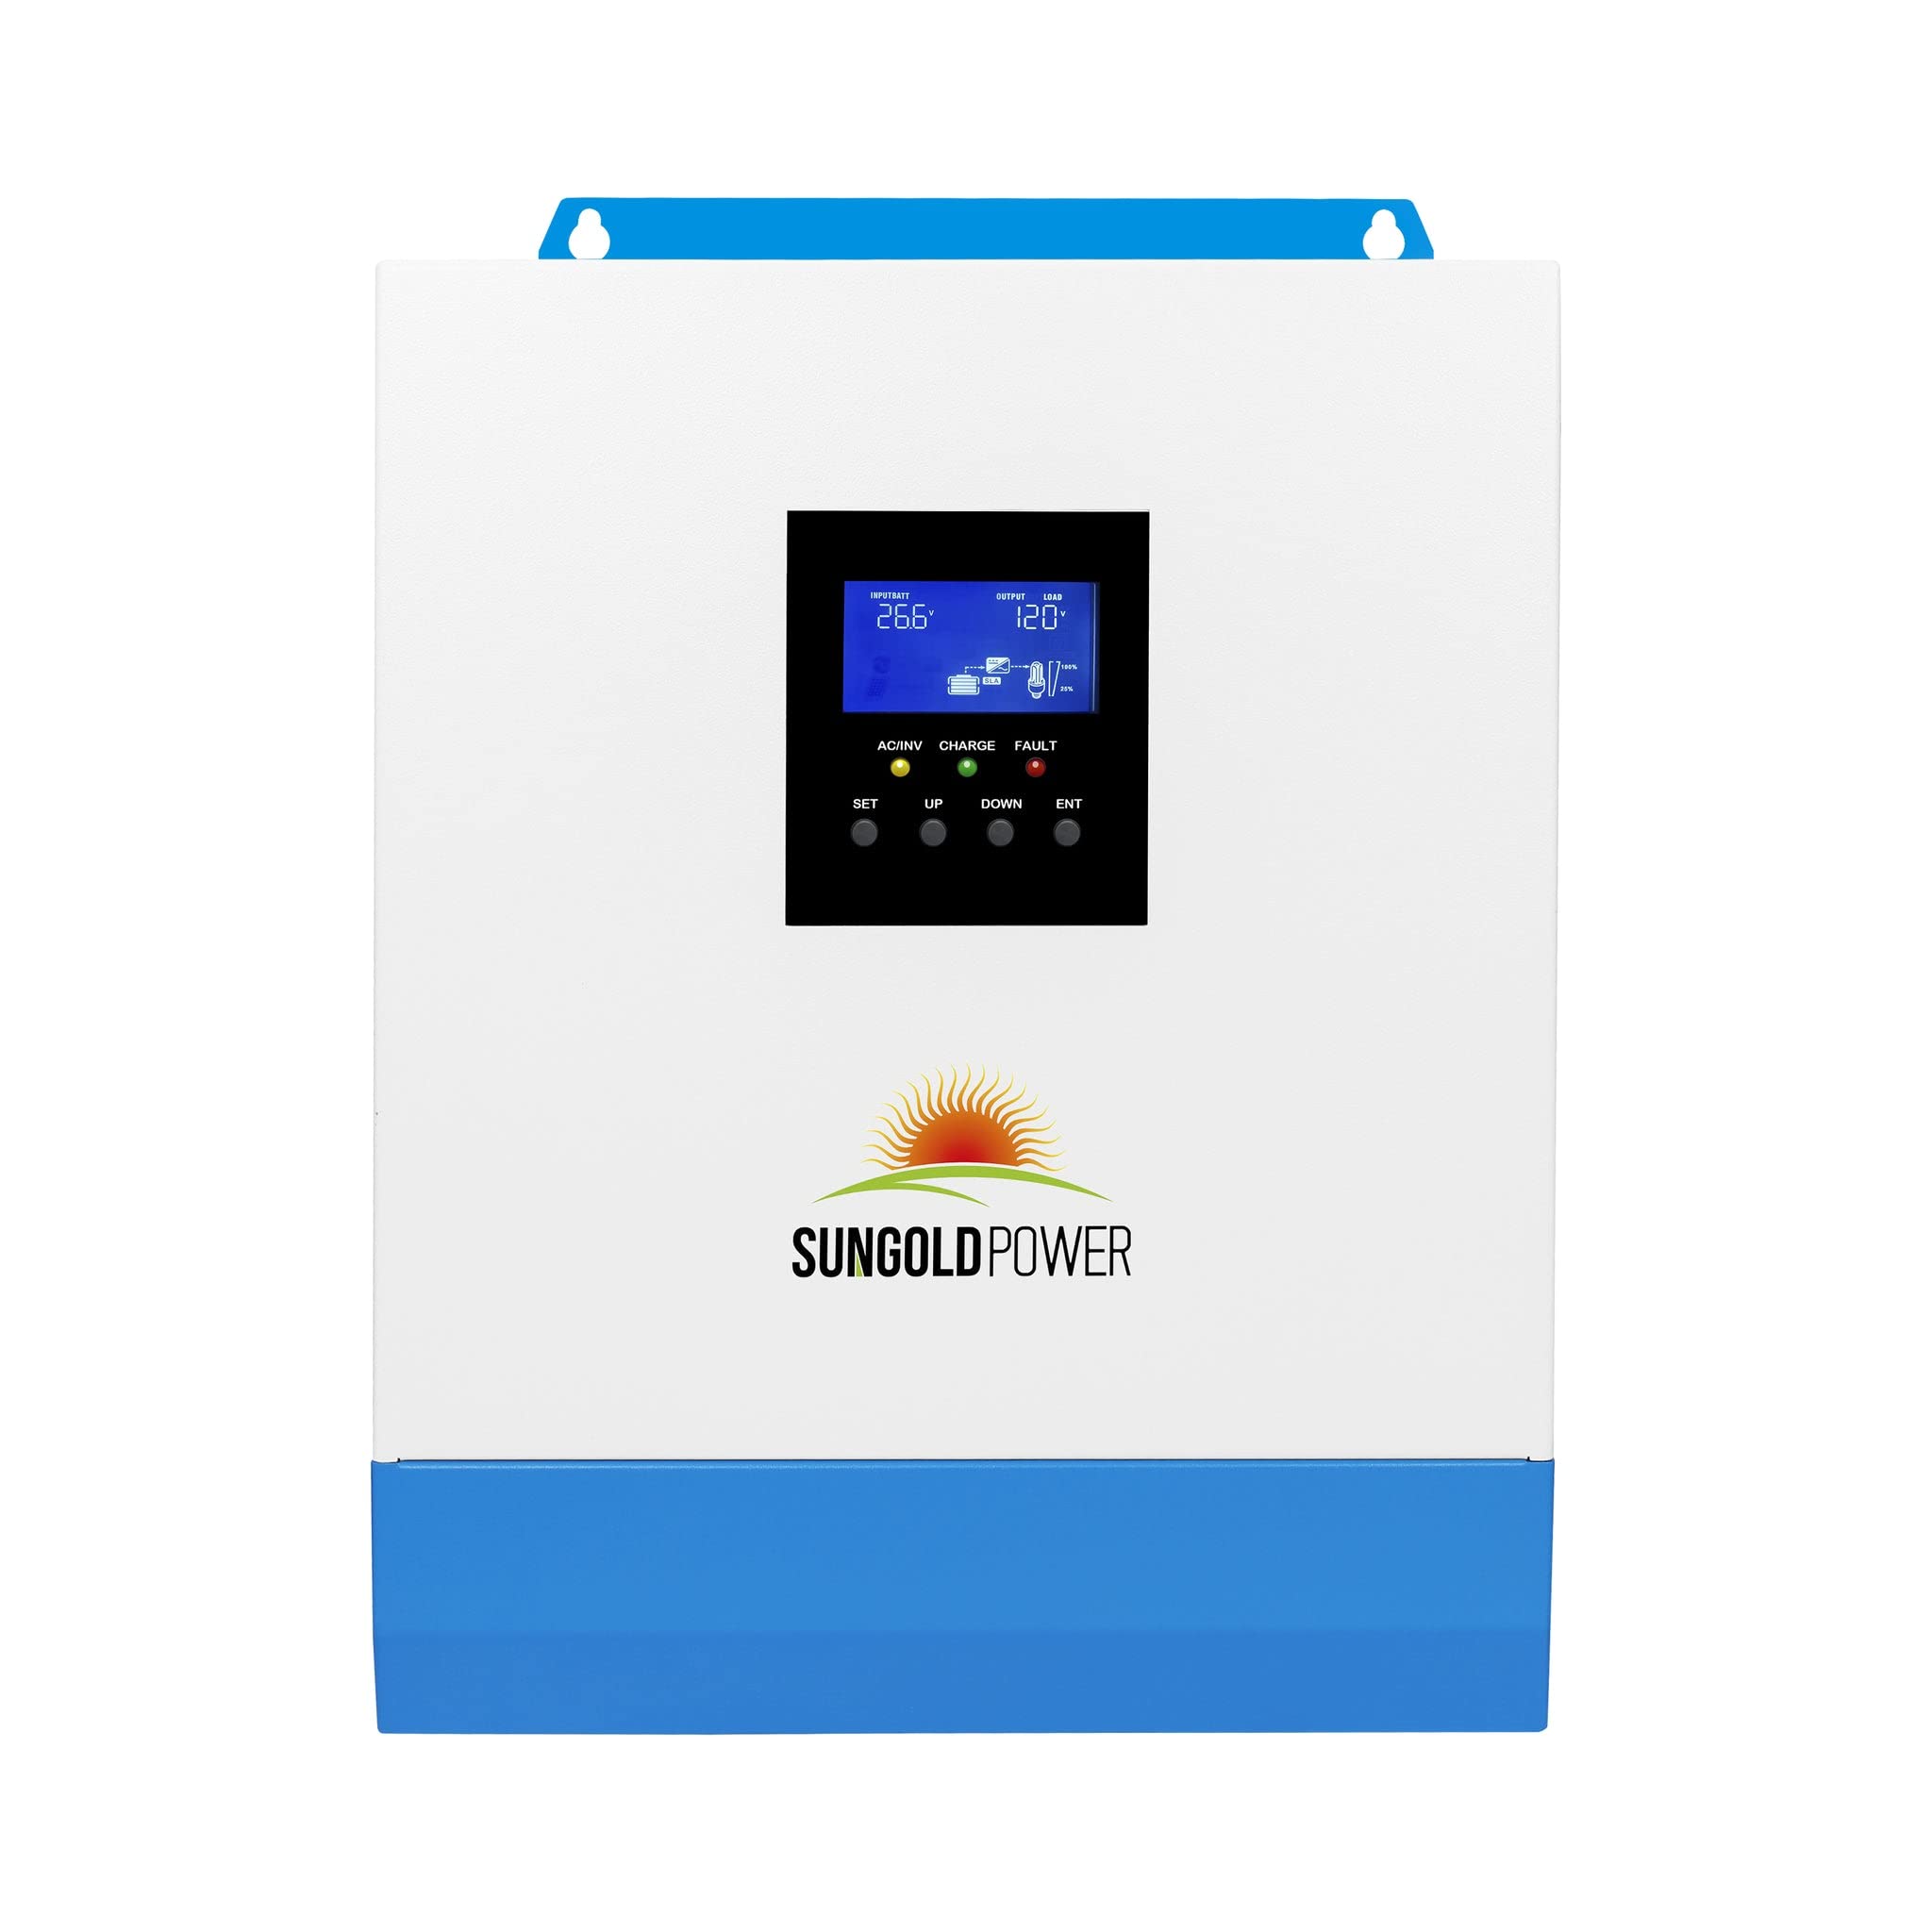 SUNGOLDPOWER 3000W 24V Hybrid Solar Inverter All in One, 120Vac AC Input,120Vac AC Output, 80A MPPT Solar Charger and 40A AC Battery Charger for Off Grid Solar System PV Range 120-450Vdc